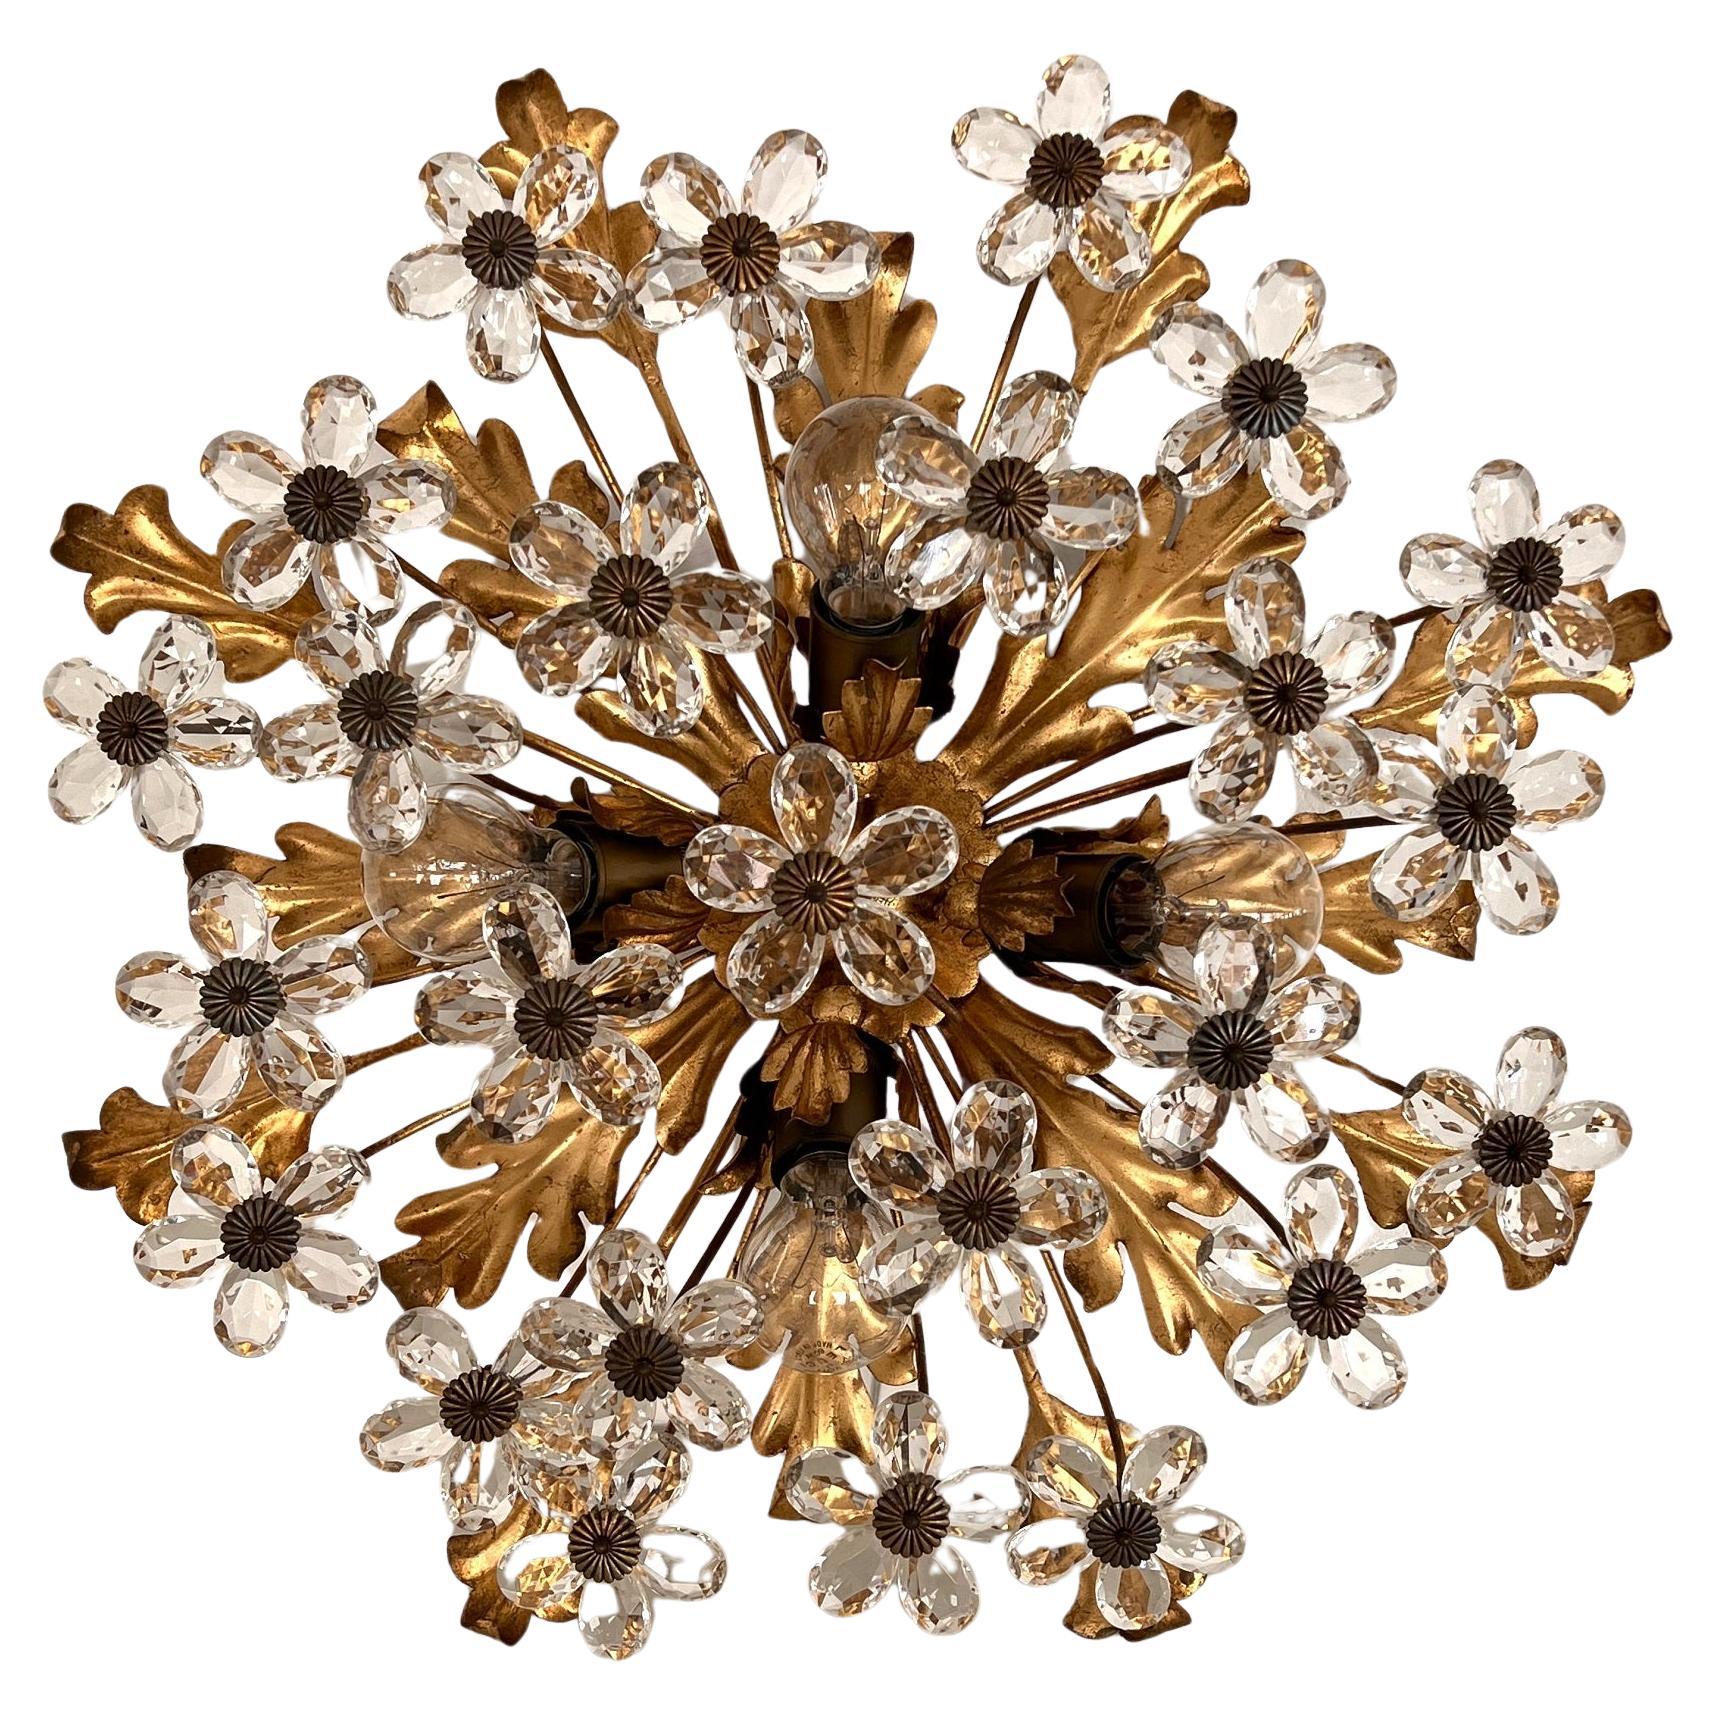 Gorgeous round shaped flush mount light made of long golden metal leaves and many cascading Murano glass flowers.
Hand crafted by Banci Florence.
The Murano glass flowers are arranged cascading downwards and are beautiful to look at, especially when